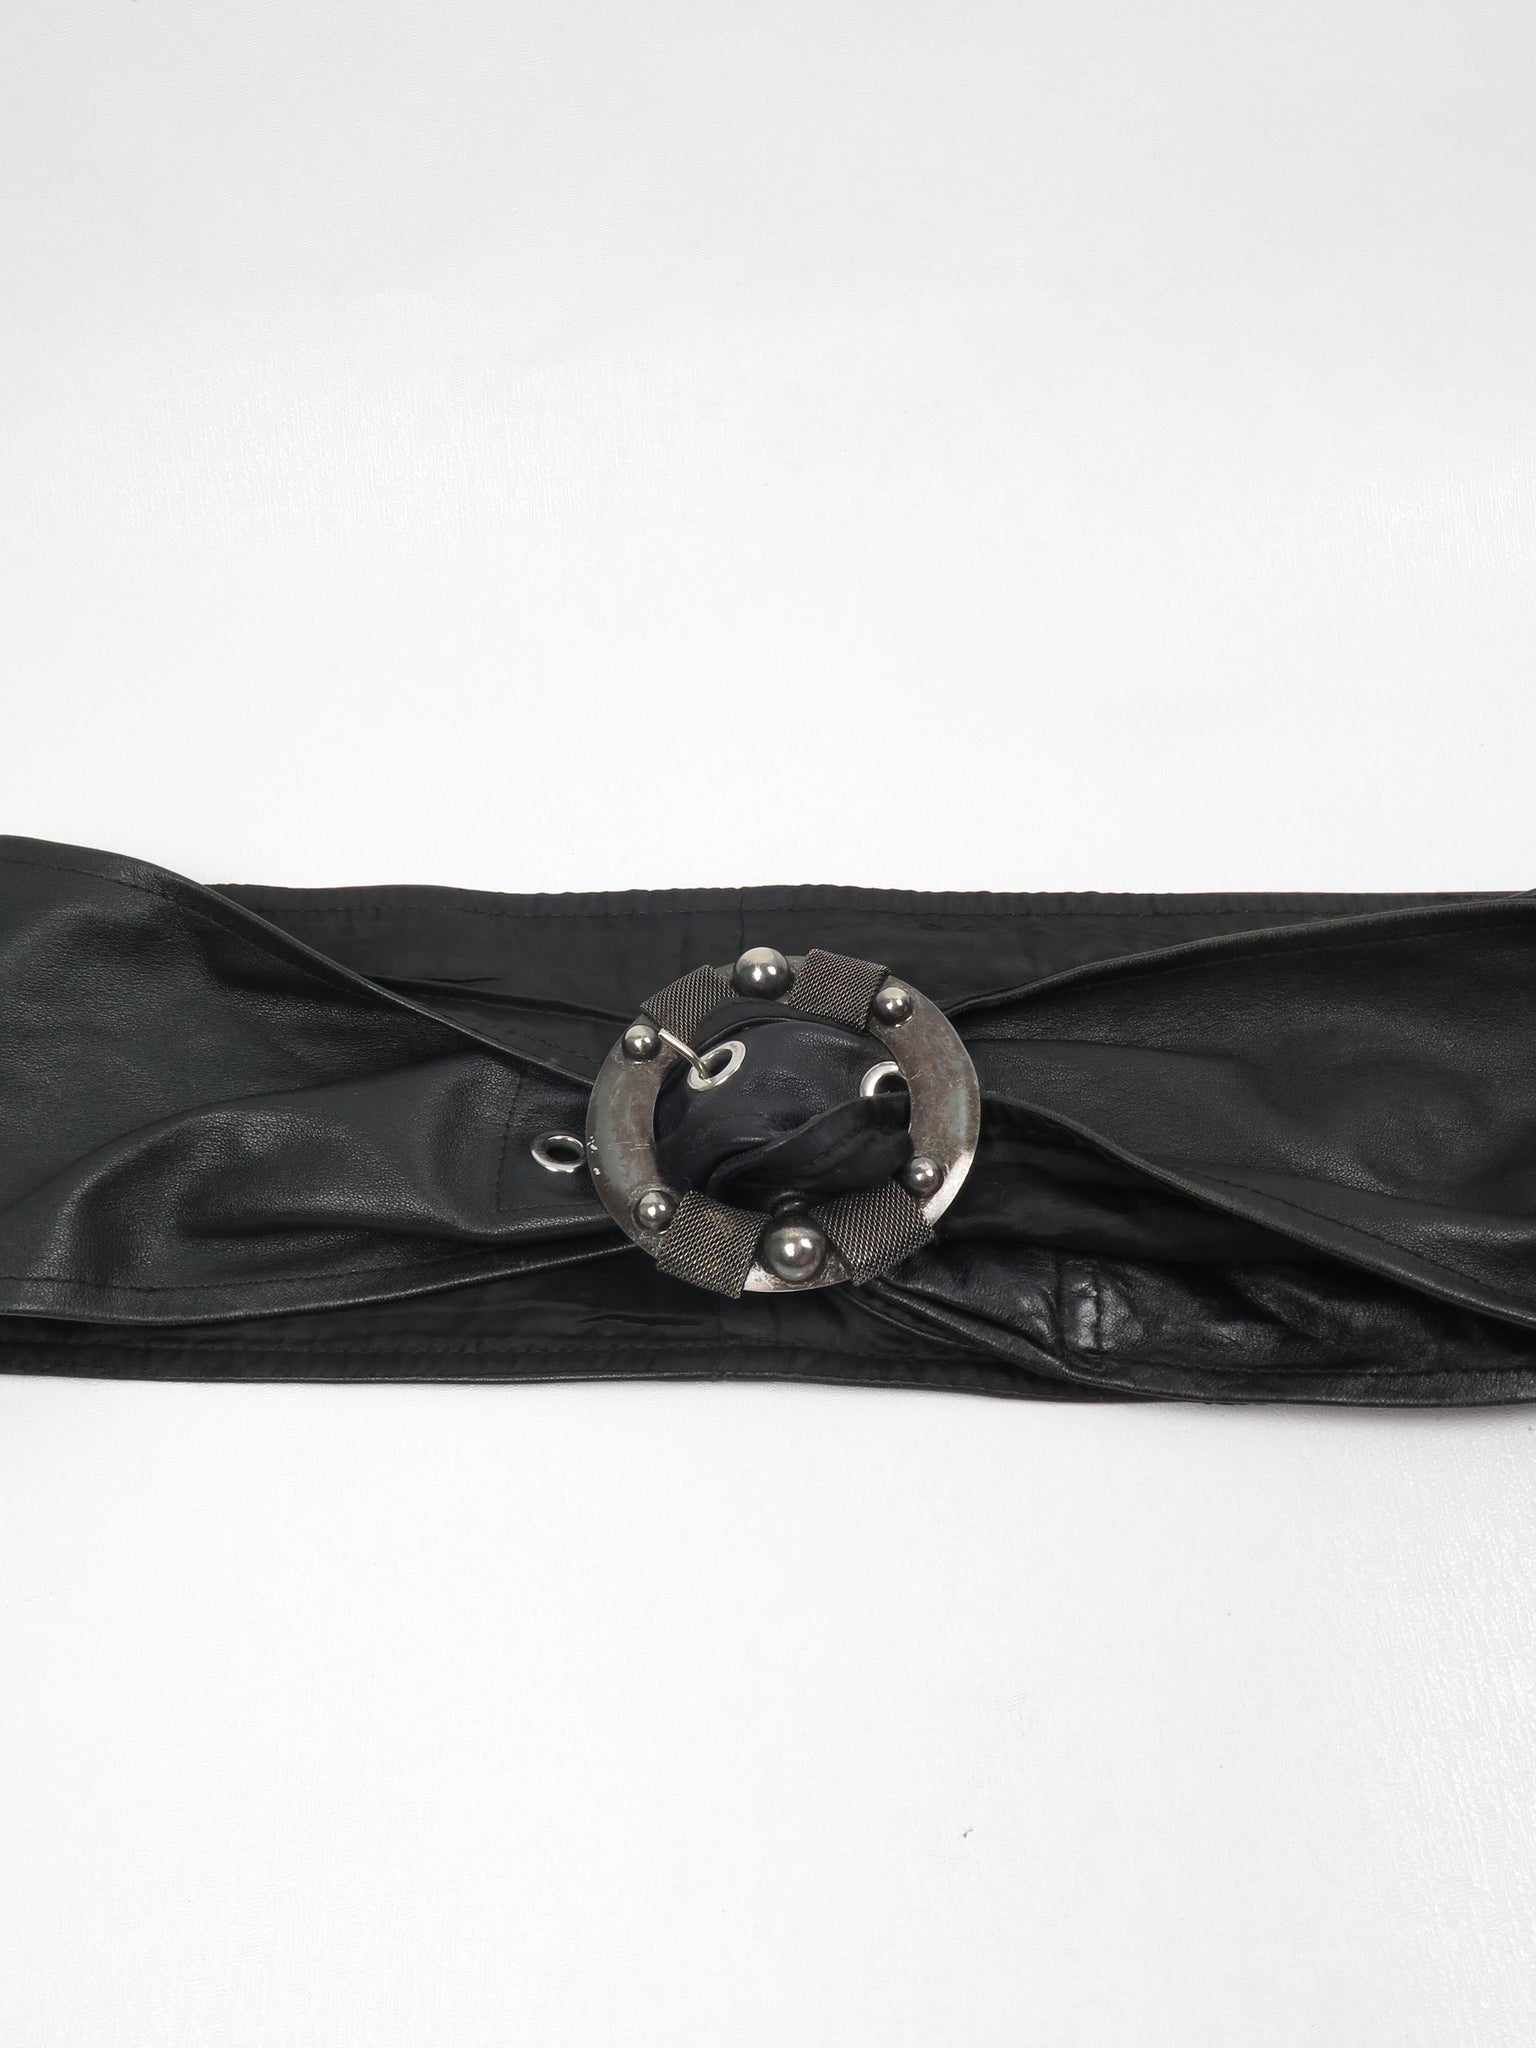 Vintage Style Black Wide Leather Belt With Buckle S/M - The Harlequin